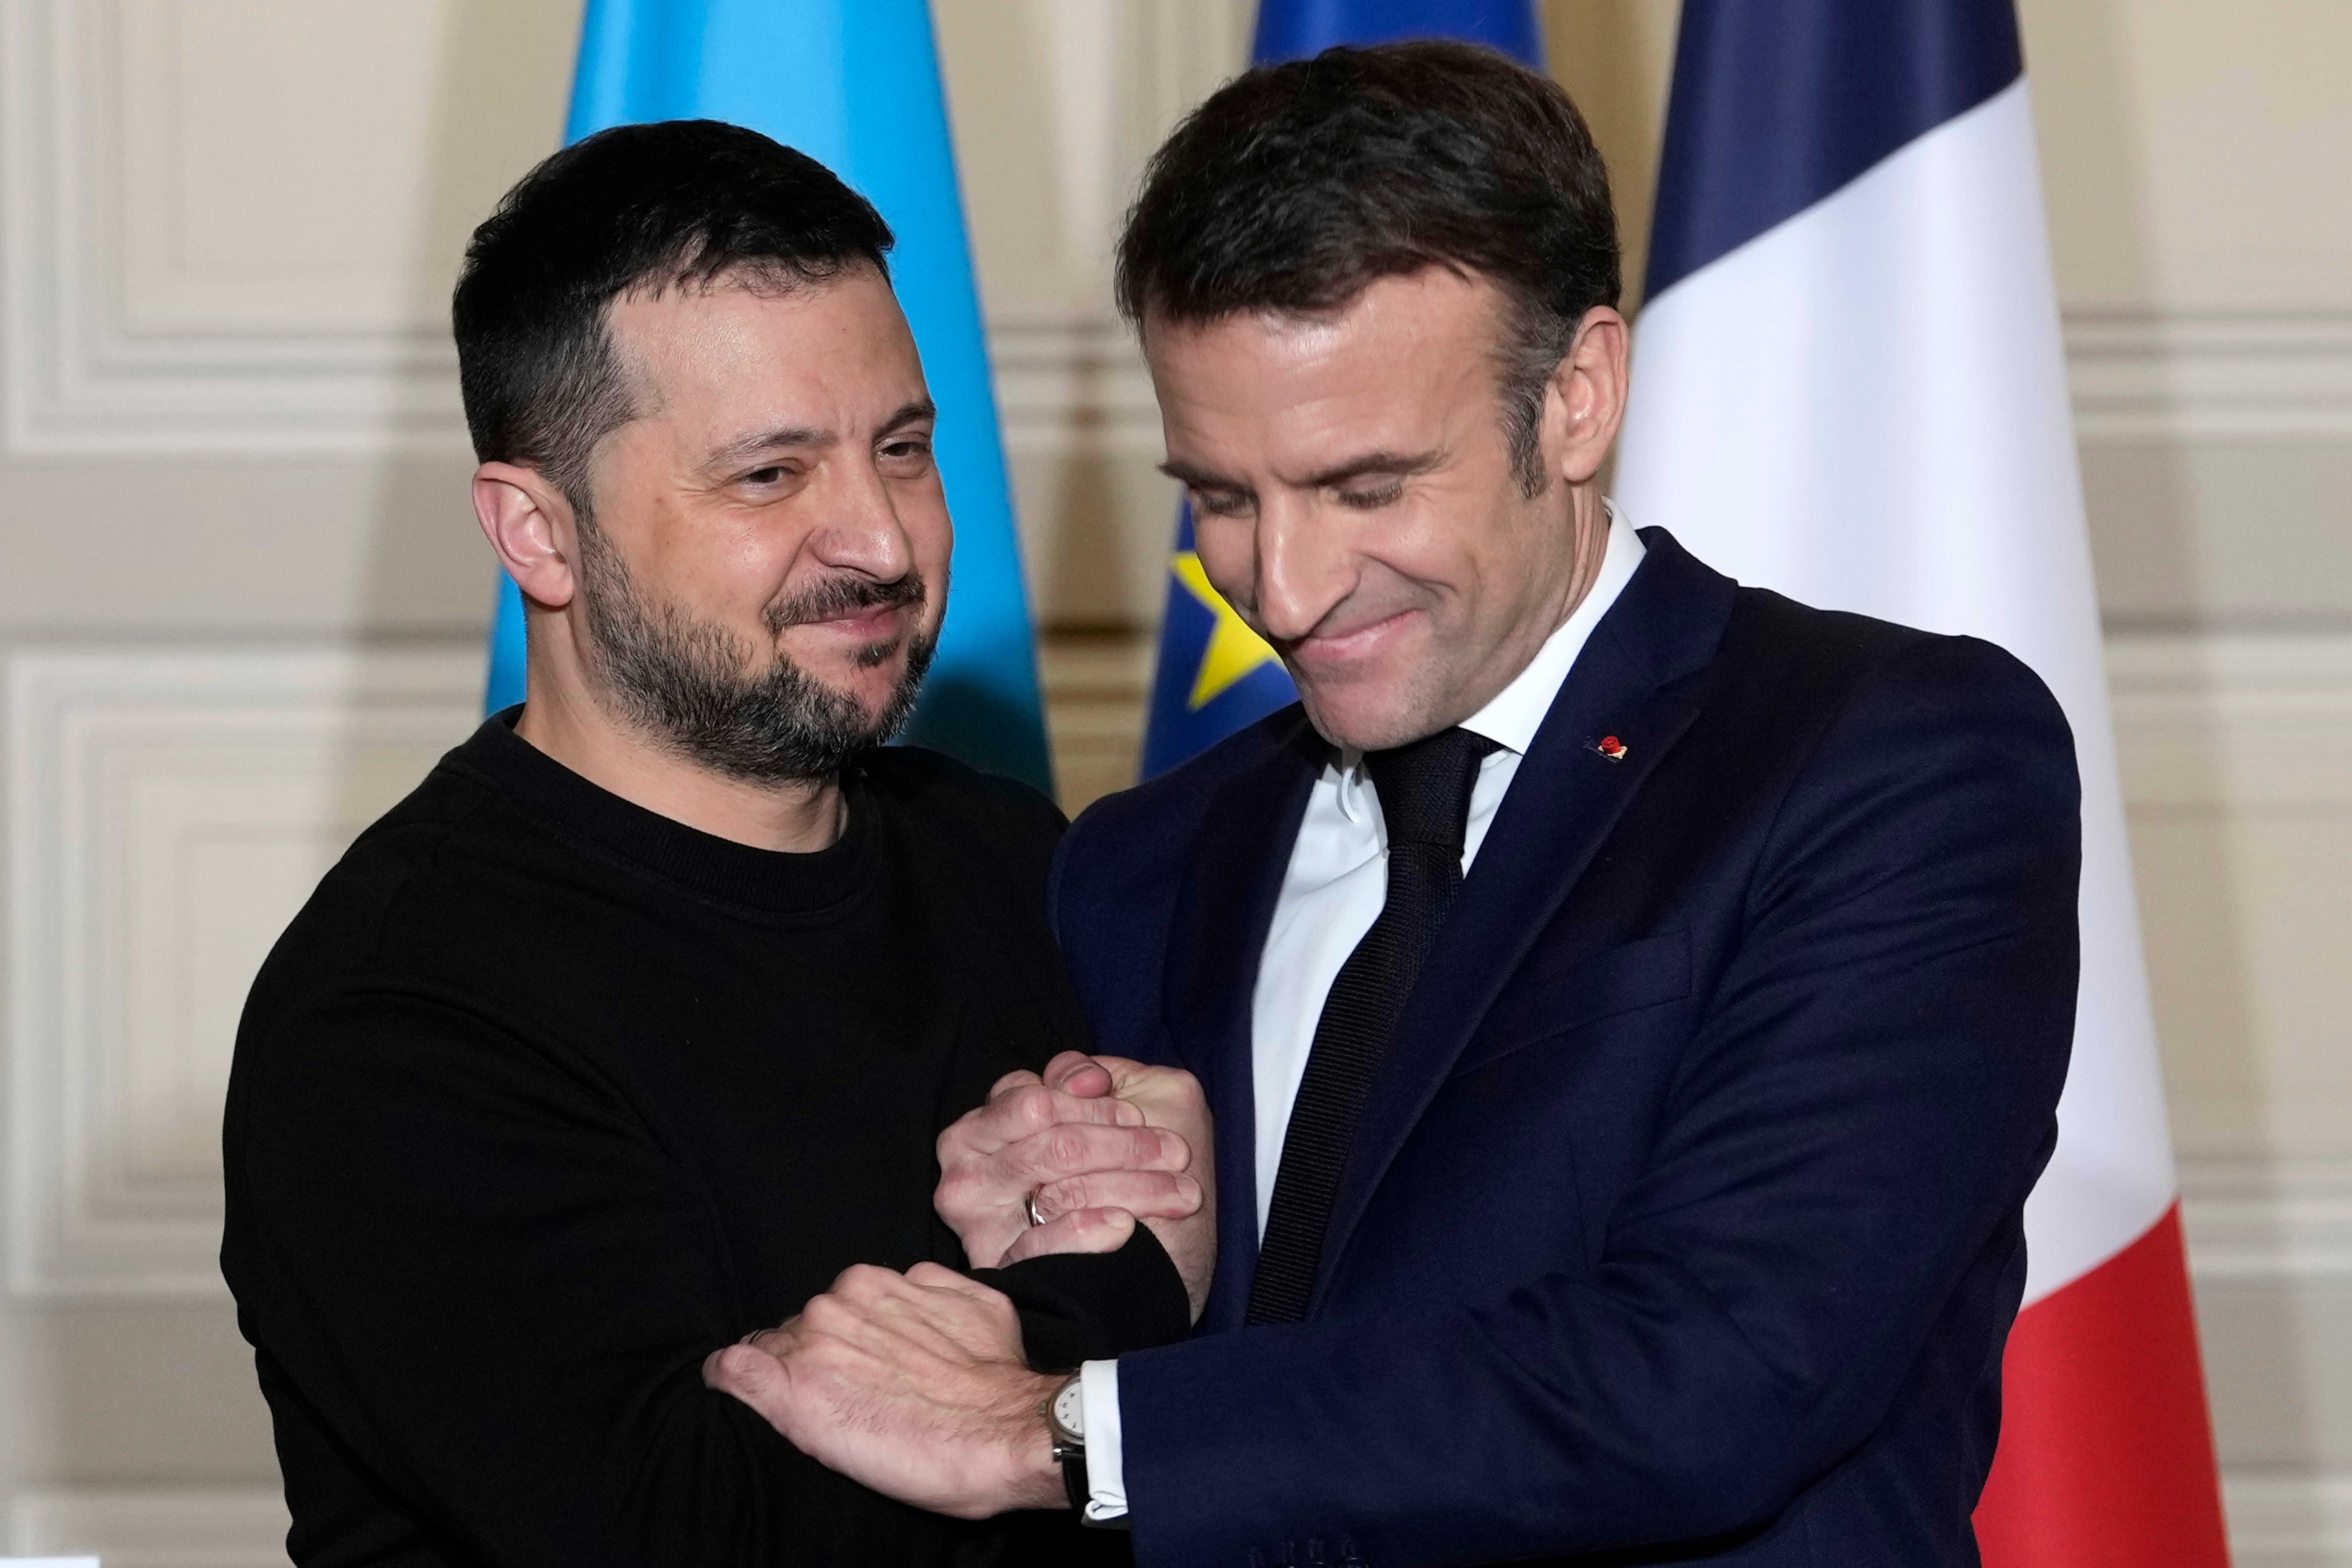 Ukrainian President Volodymyr Zelenskyy, left, and French President Emmanuel Macron shake hands after a press conference in February